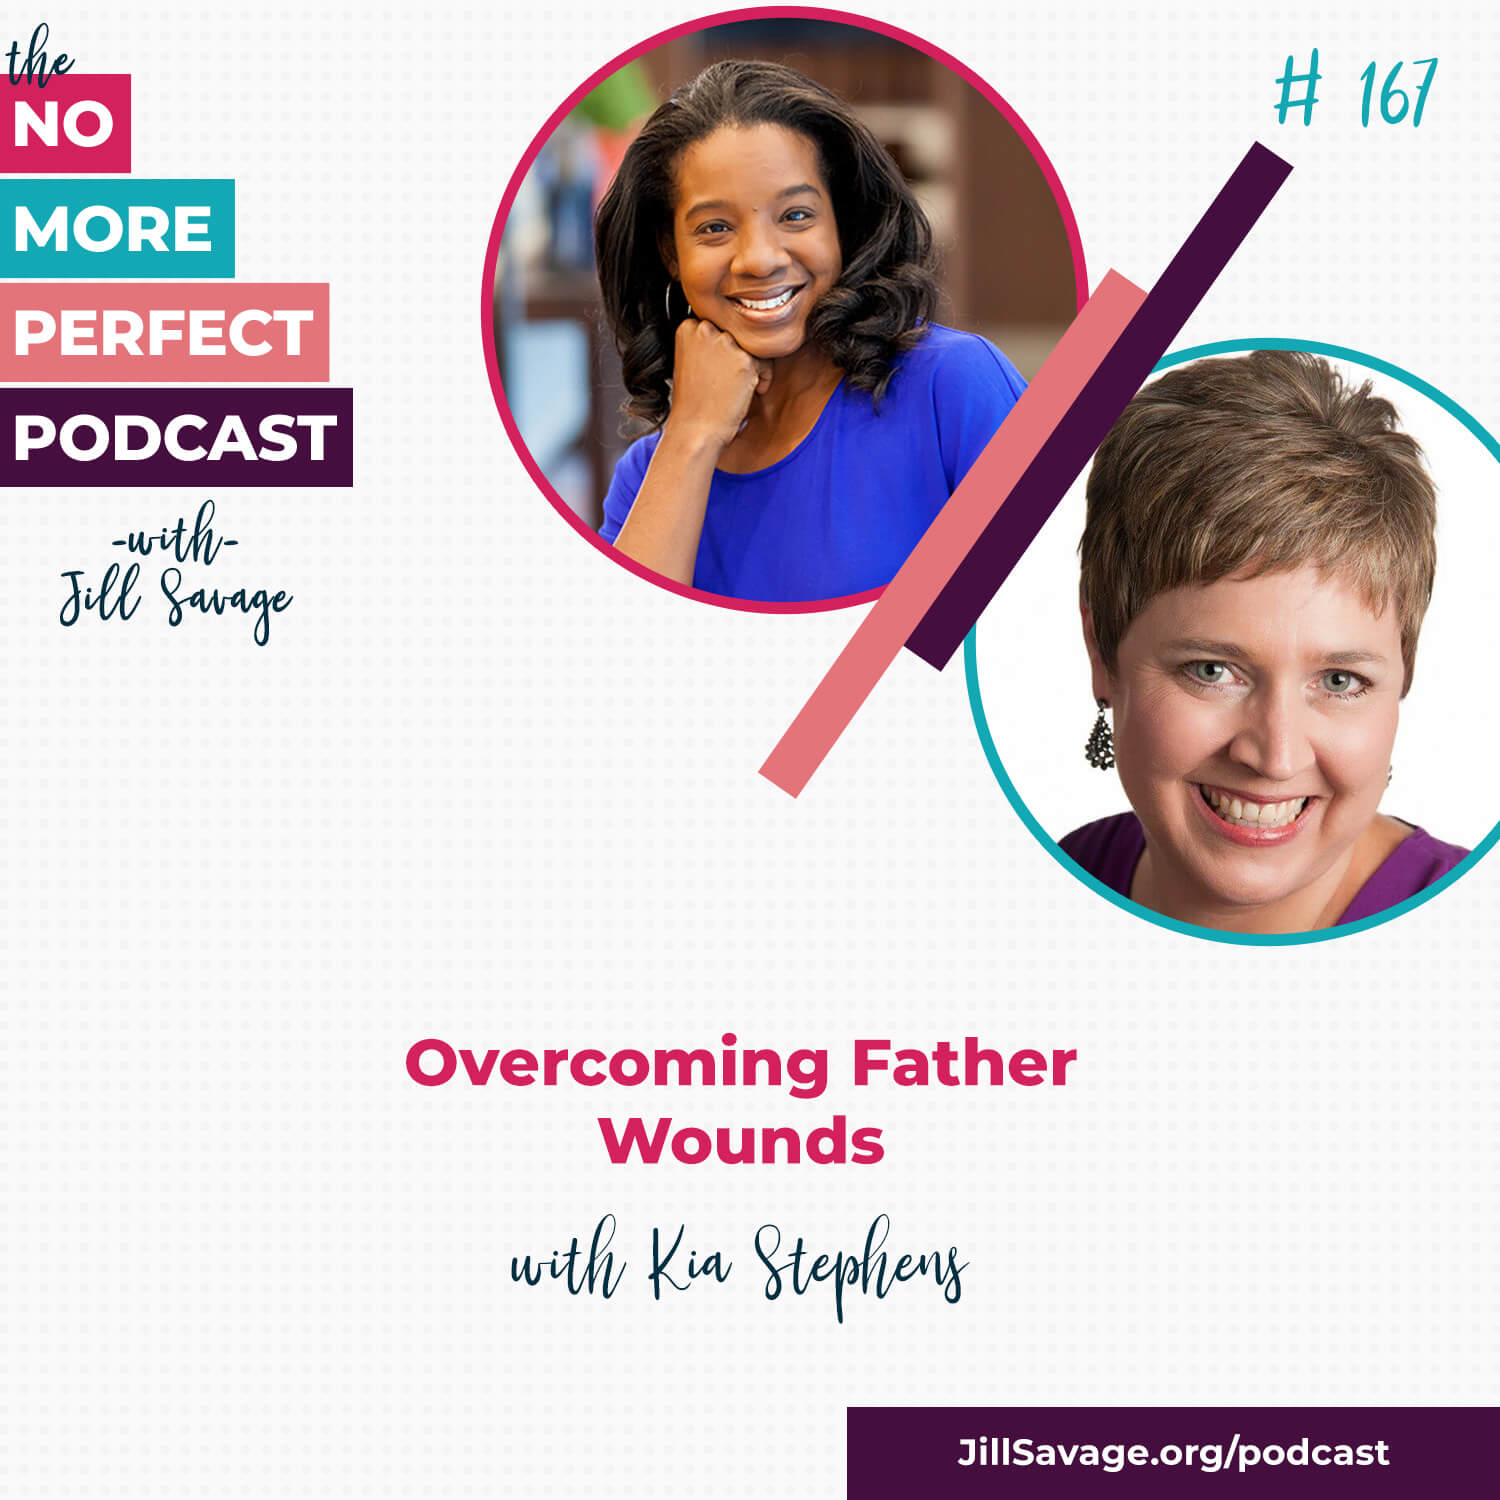 Overcoming Father Wounds with Kia Stephens | Episode 167